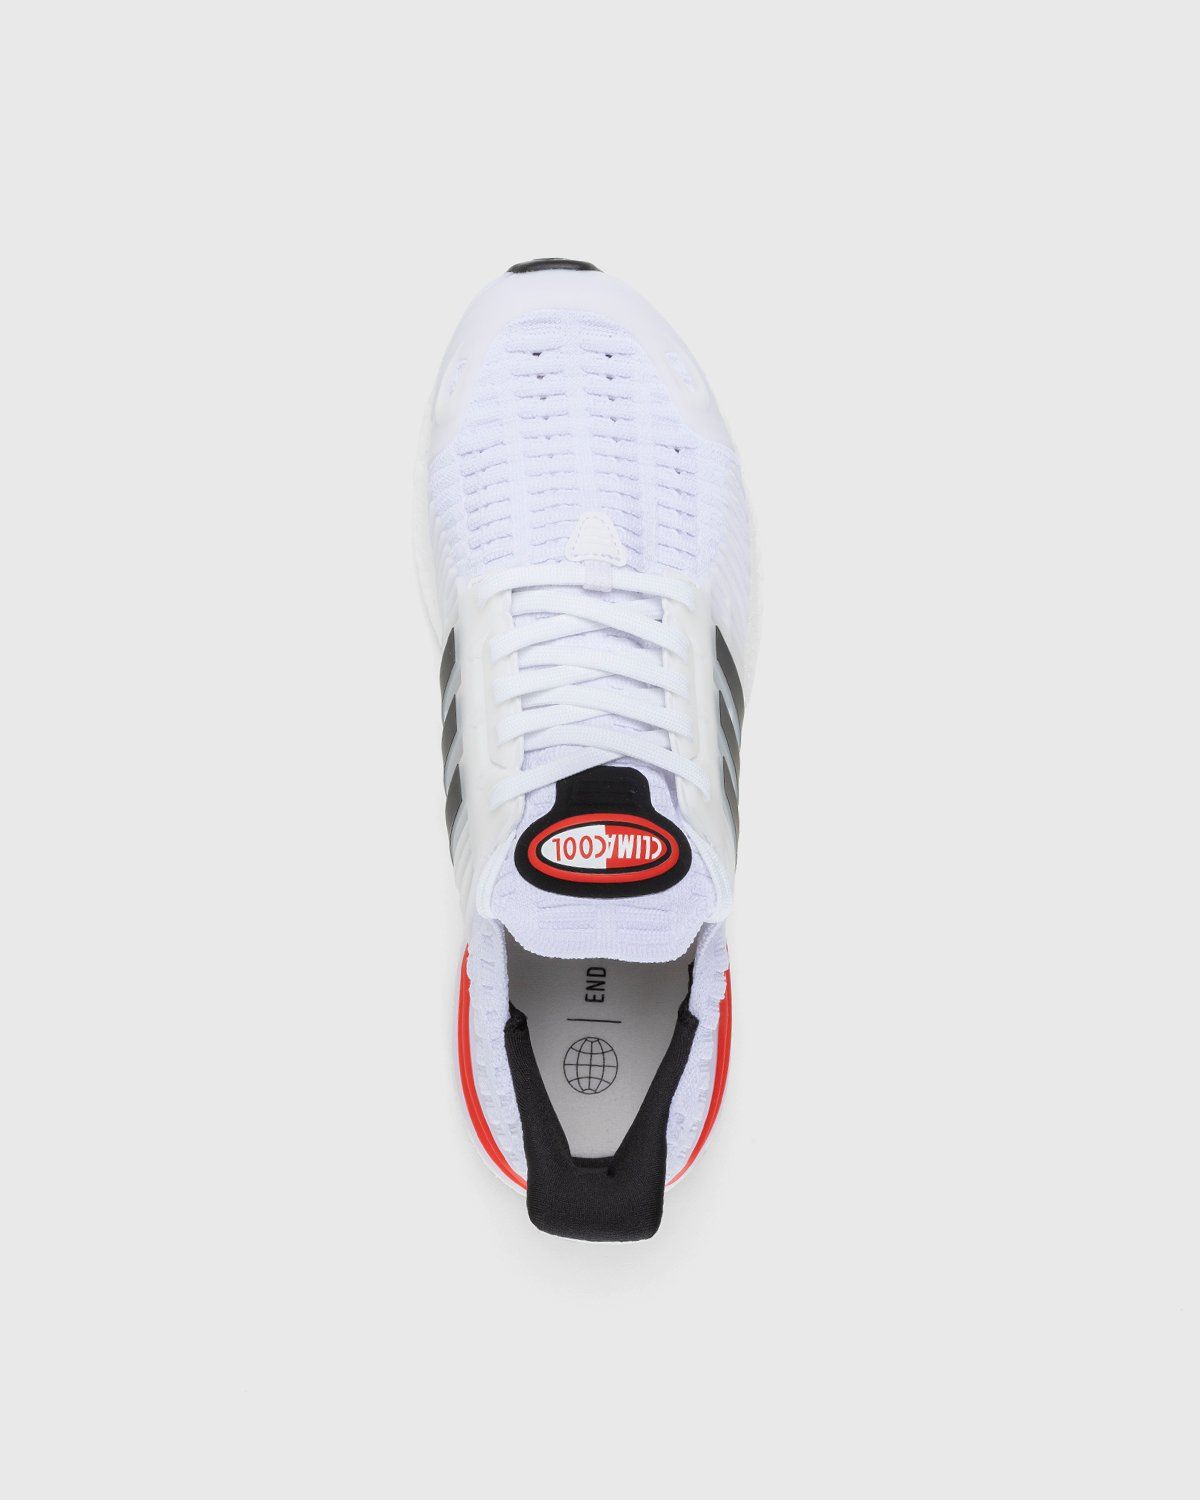 Adidas – Ultraboost Climacool 1 DNA White/Black/Red - Low Top Sneakers - White - Image 5